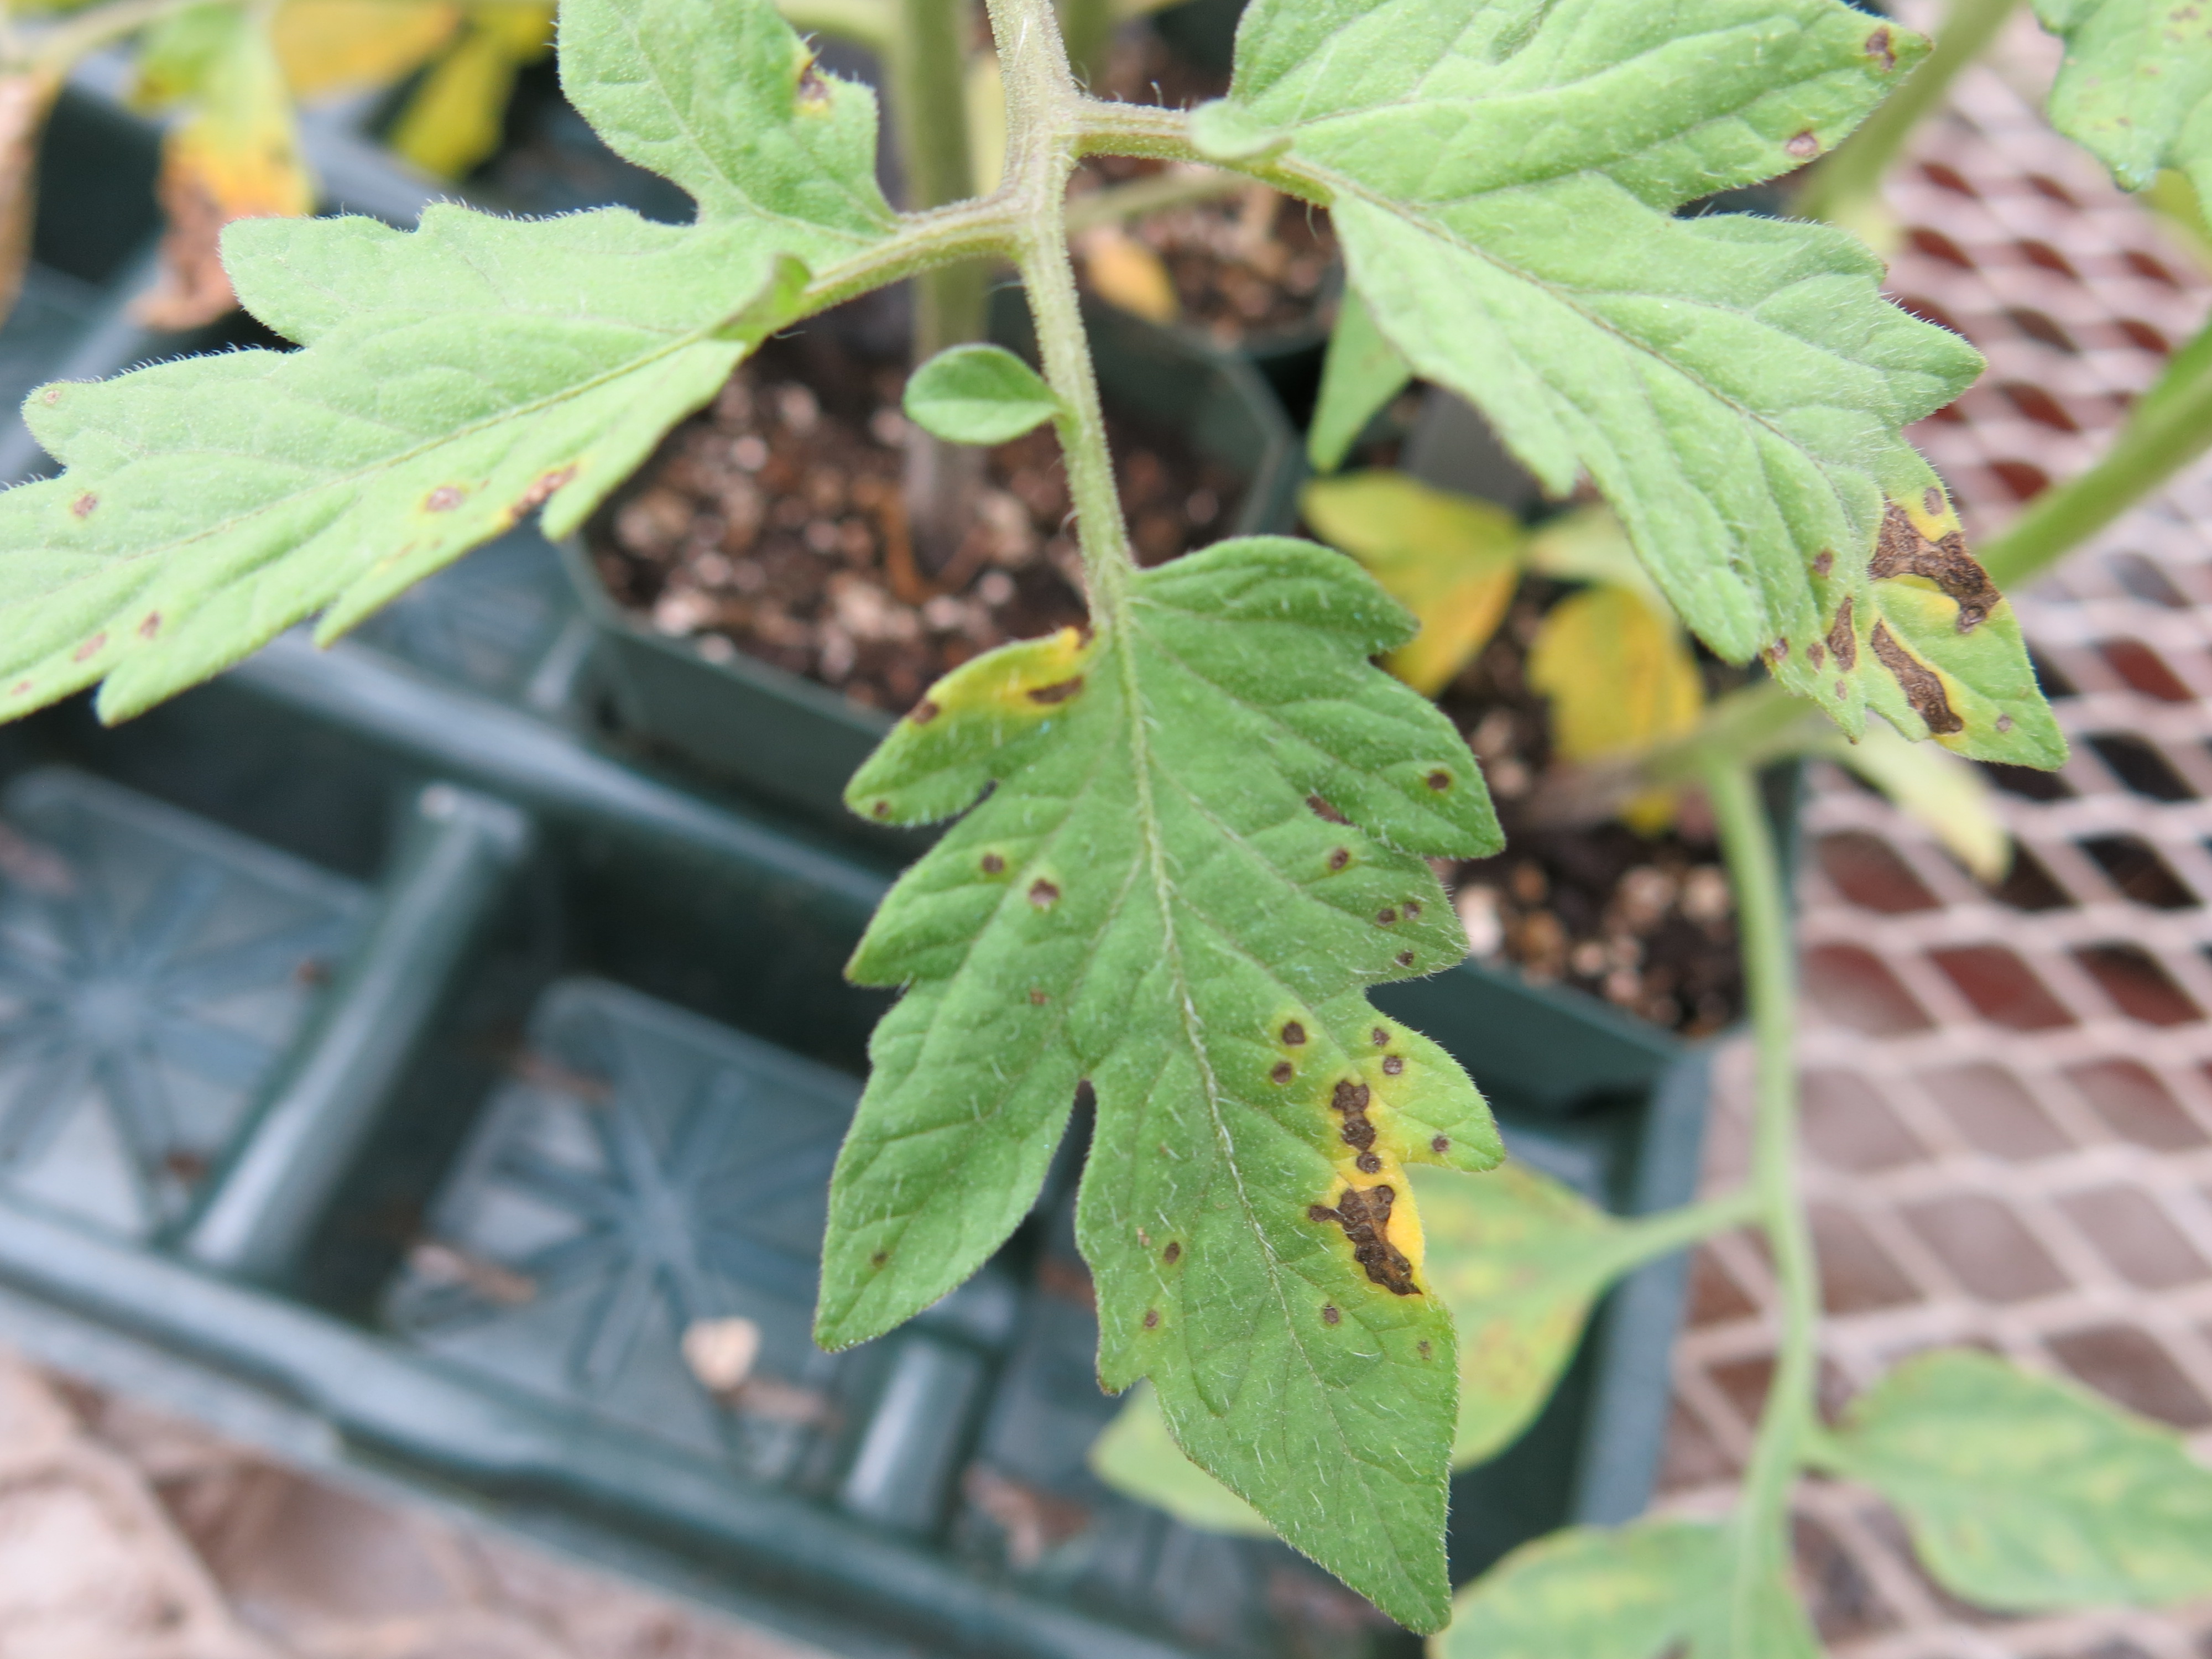 Tips to Prevent and reduce Bacterial Spot on Tomato Plants